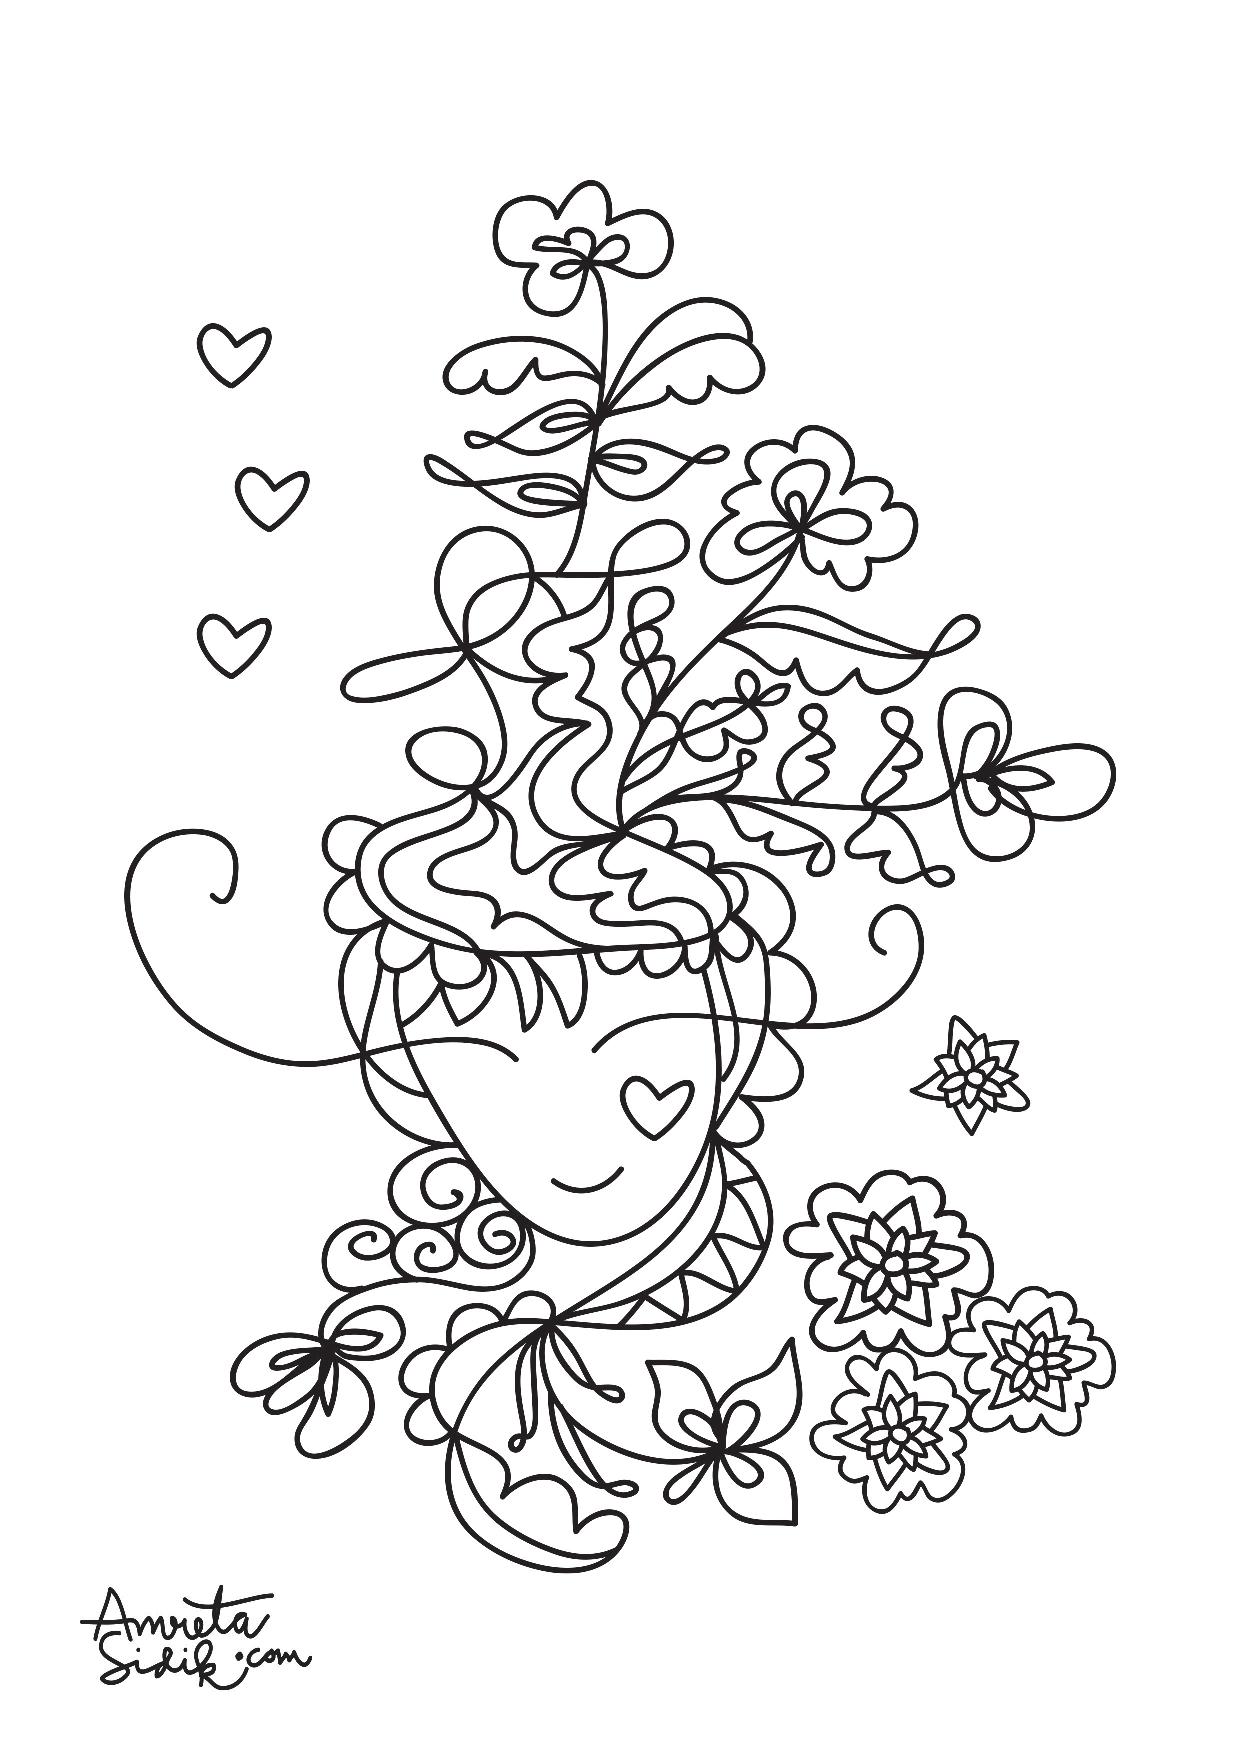 https://www.justcolor.net/wp-content/uploads/sites/1/nggallery/anti-stress/coloring-adult-flowers-girl-1.jpg